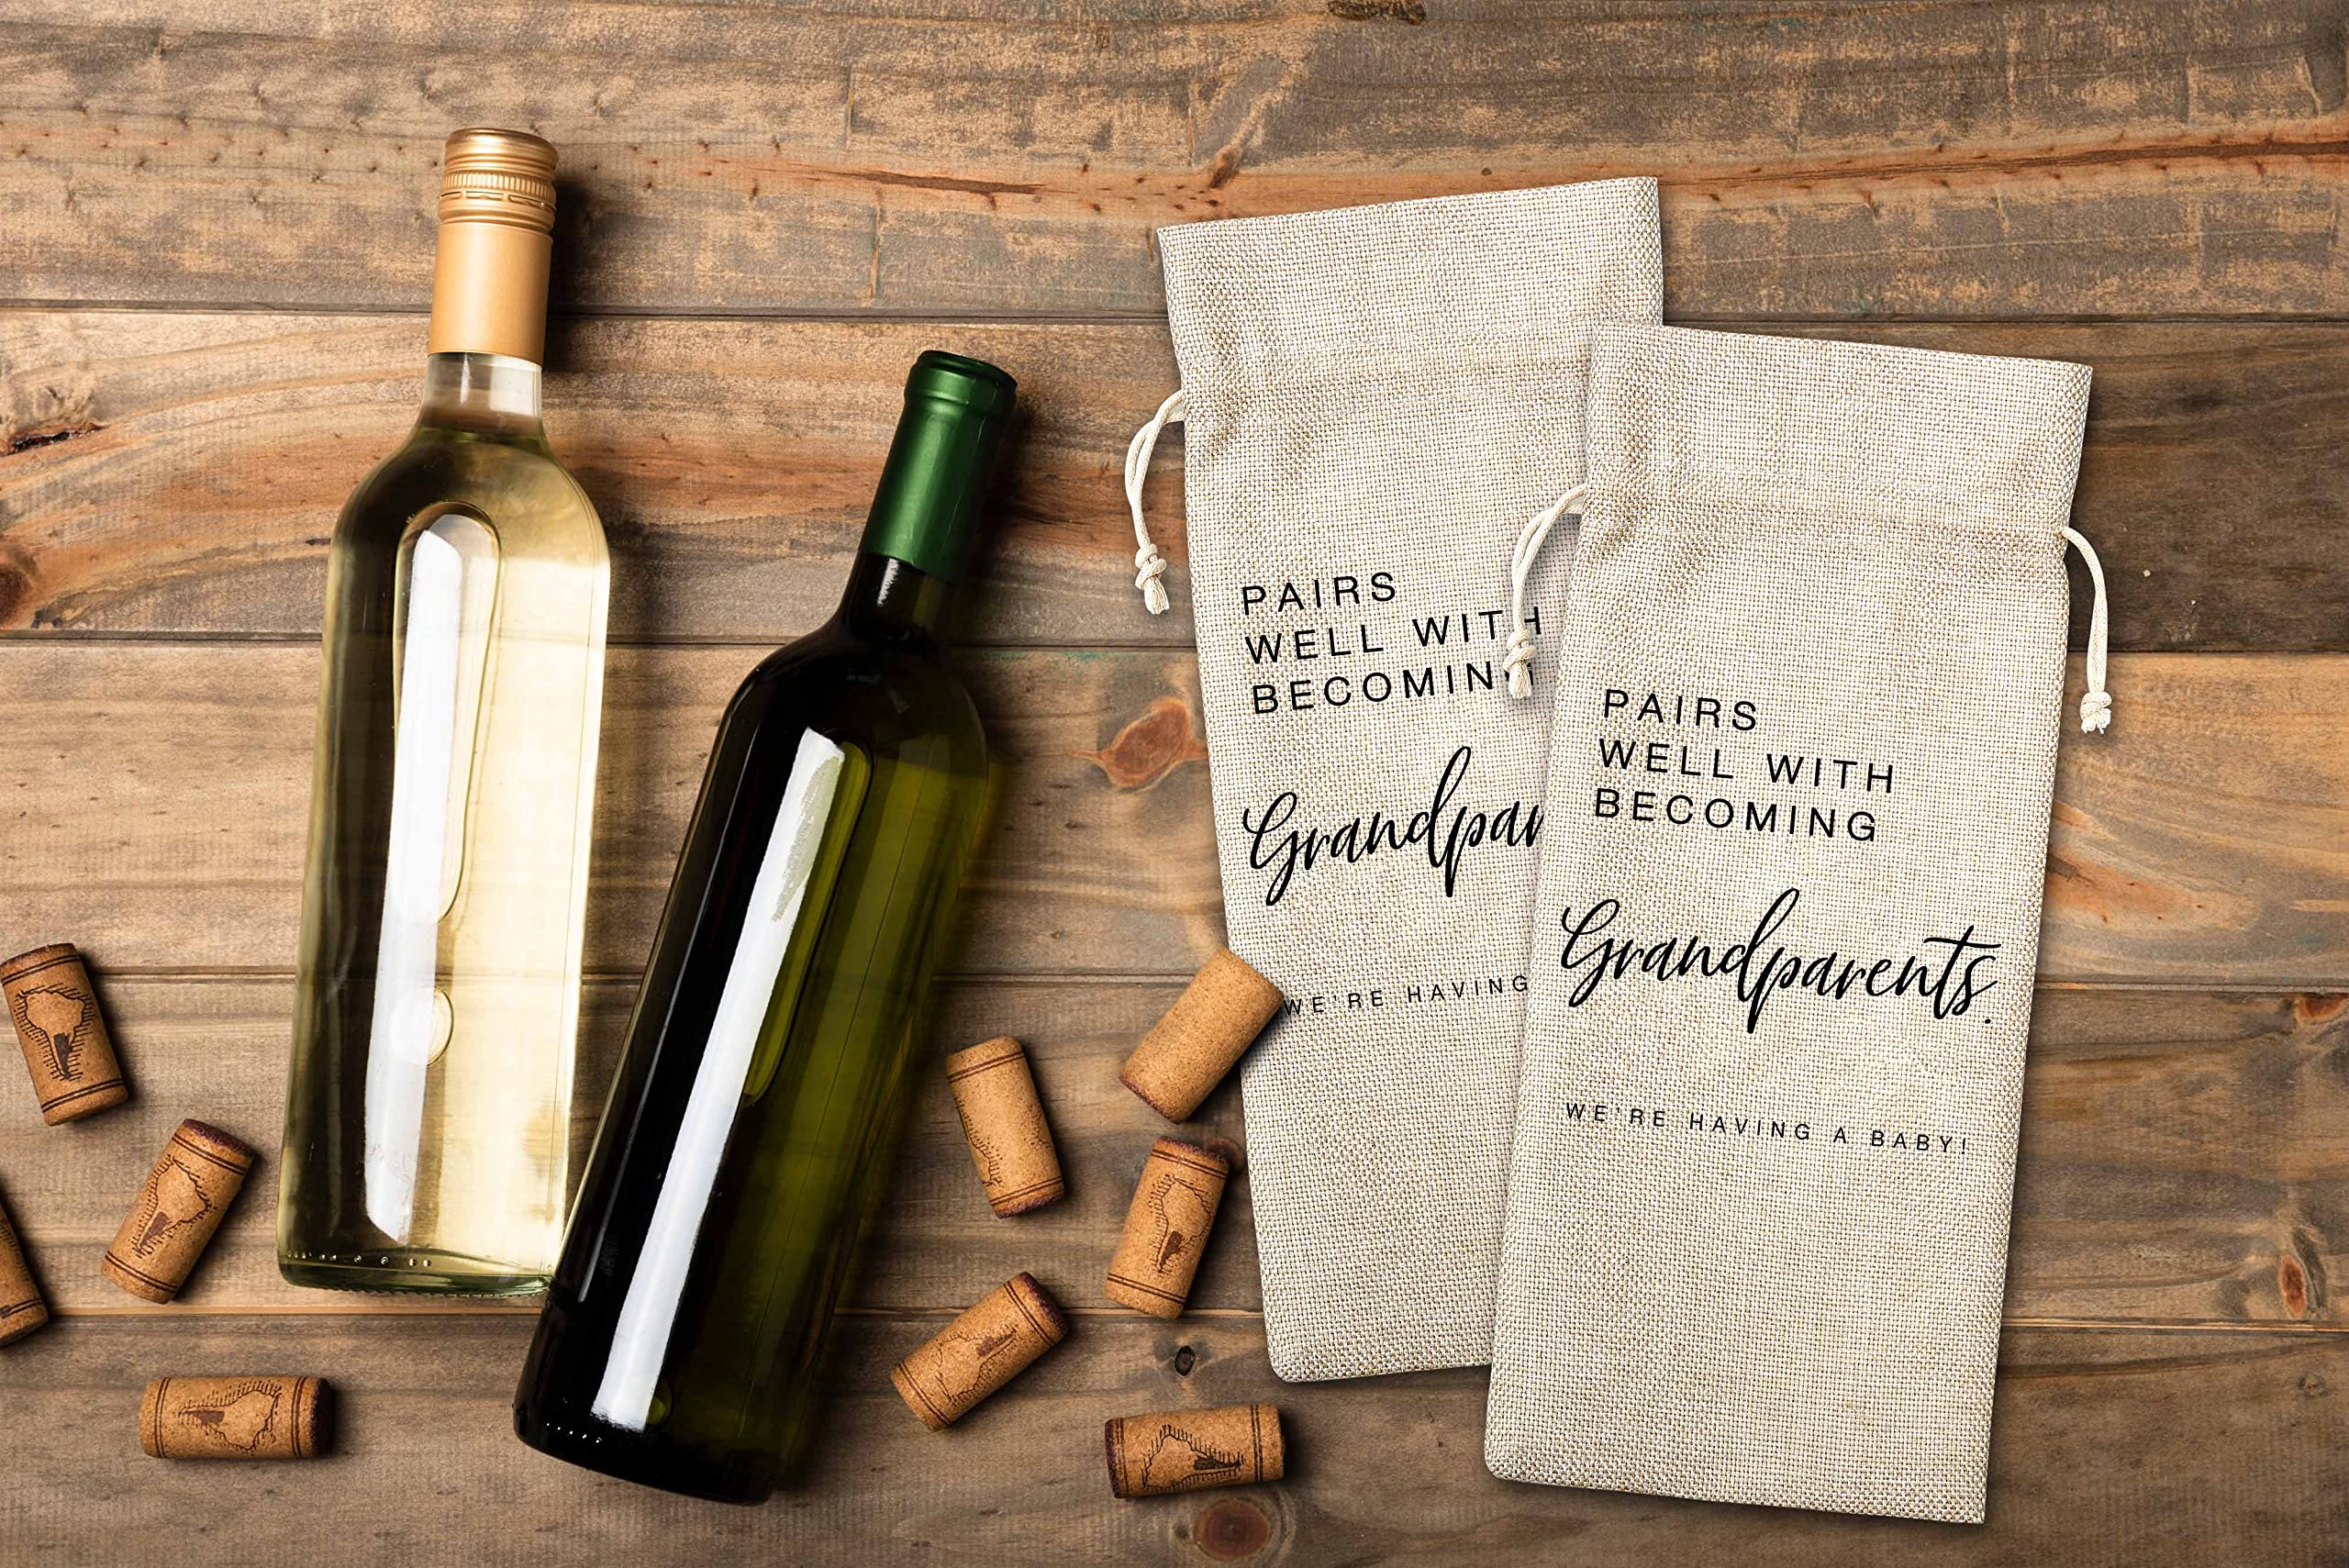 Baby Announcement Wine Bag, Pairs Well With Becoming Grandparent: We Are Having A Baby, Pregnancy Announcement, New Grandparents - 1 Pack (WINEDAI-036)